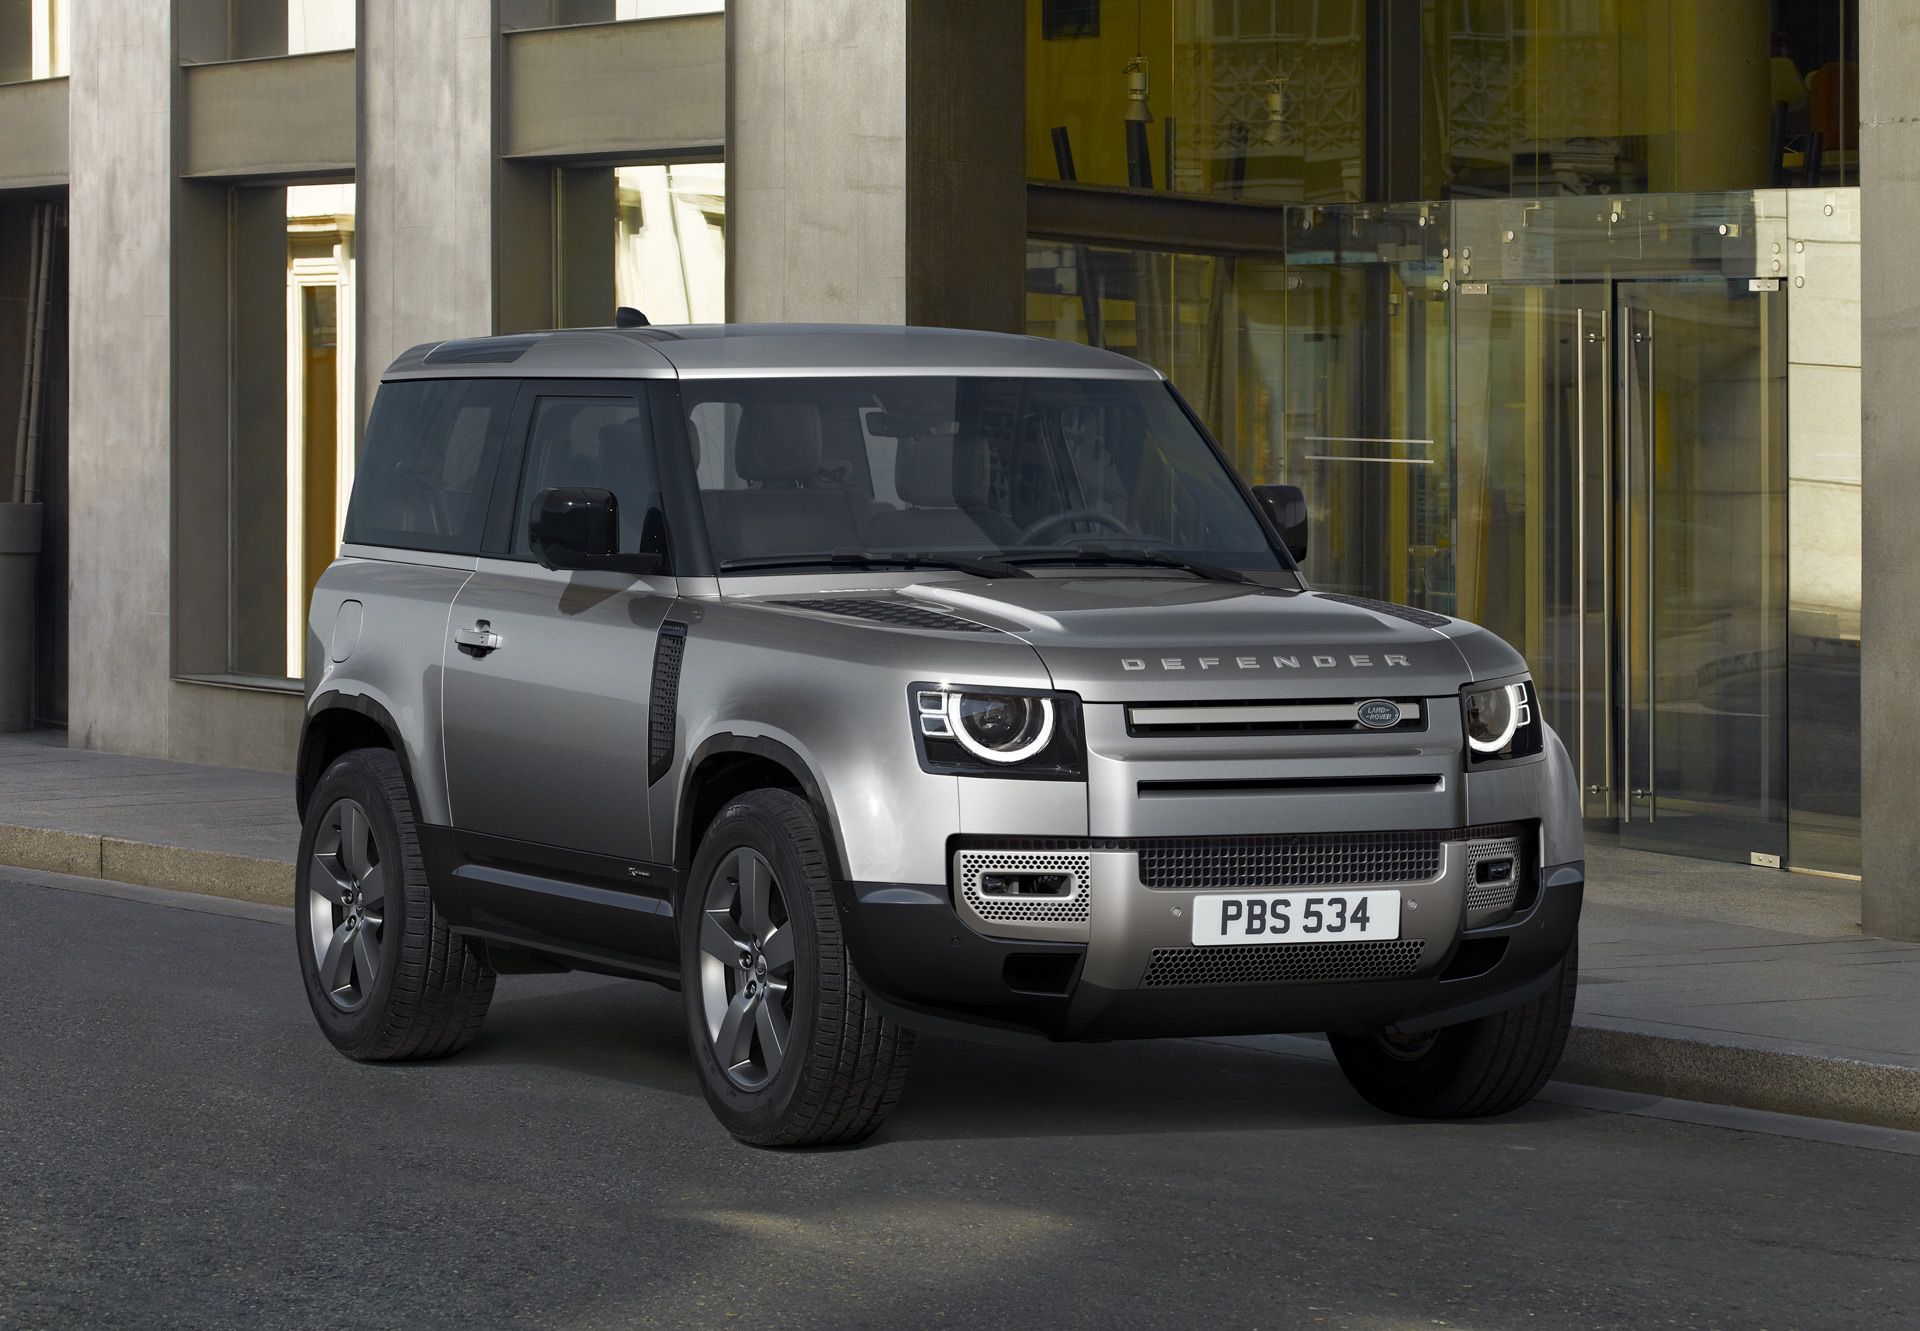 2021 Land Rover Defender announced with new XDynamic